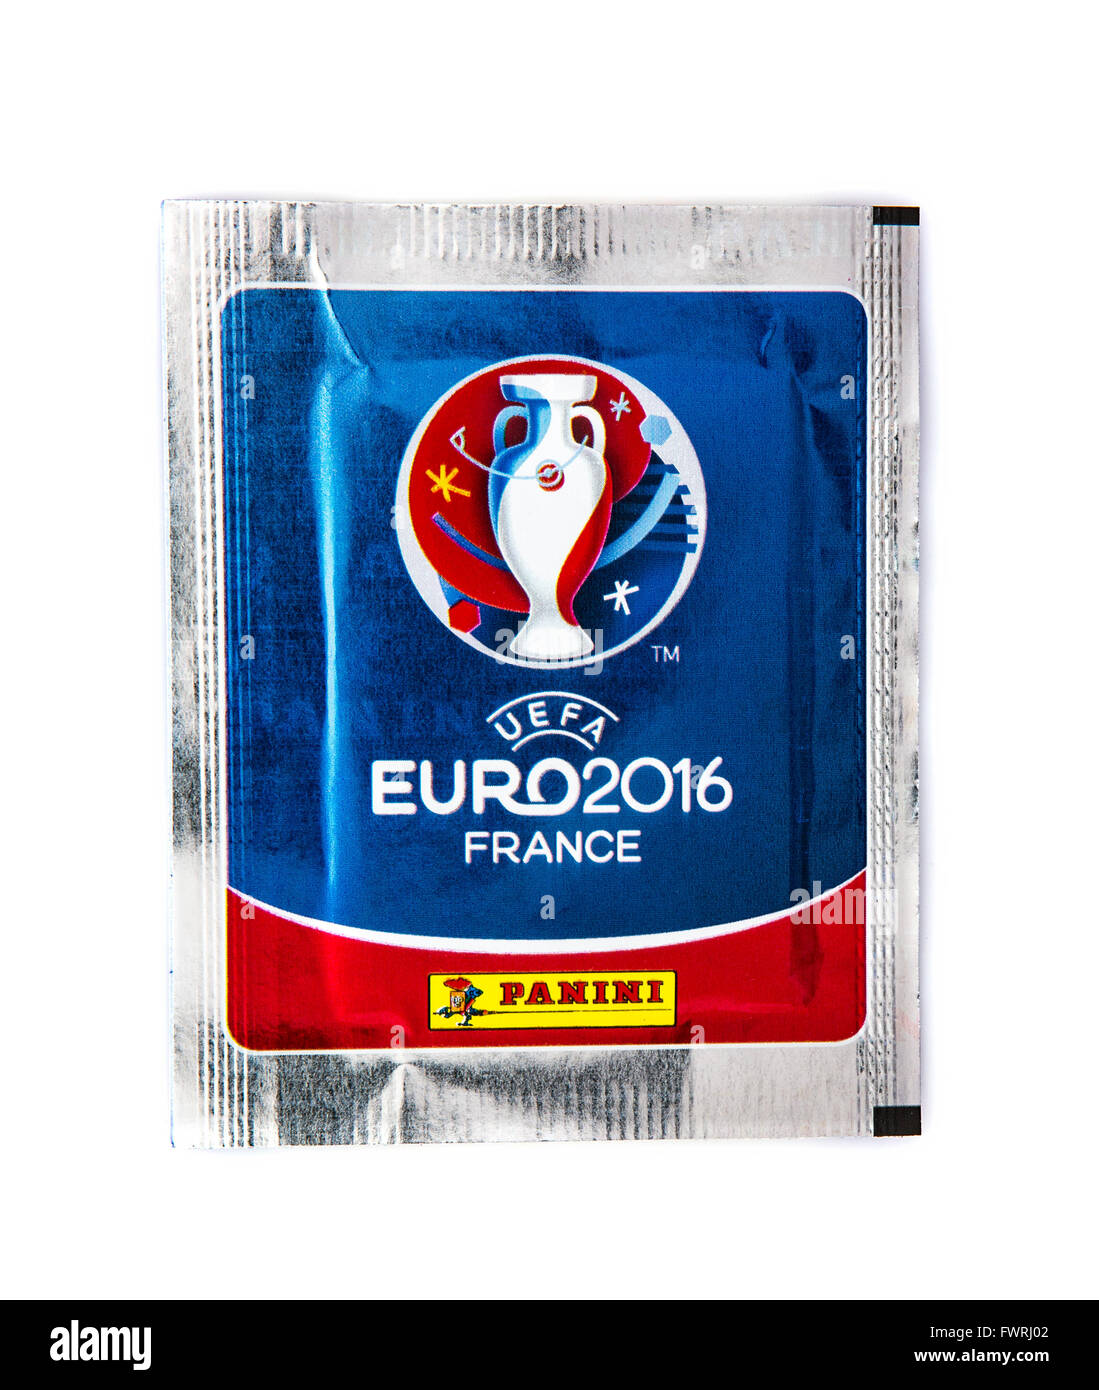 Panini Euro 2016 France Sticker Collection and Album on a white background  Stock Photo - Alamy